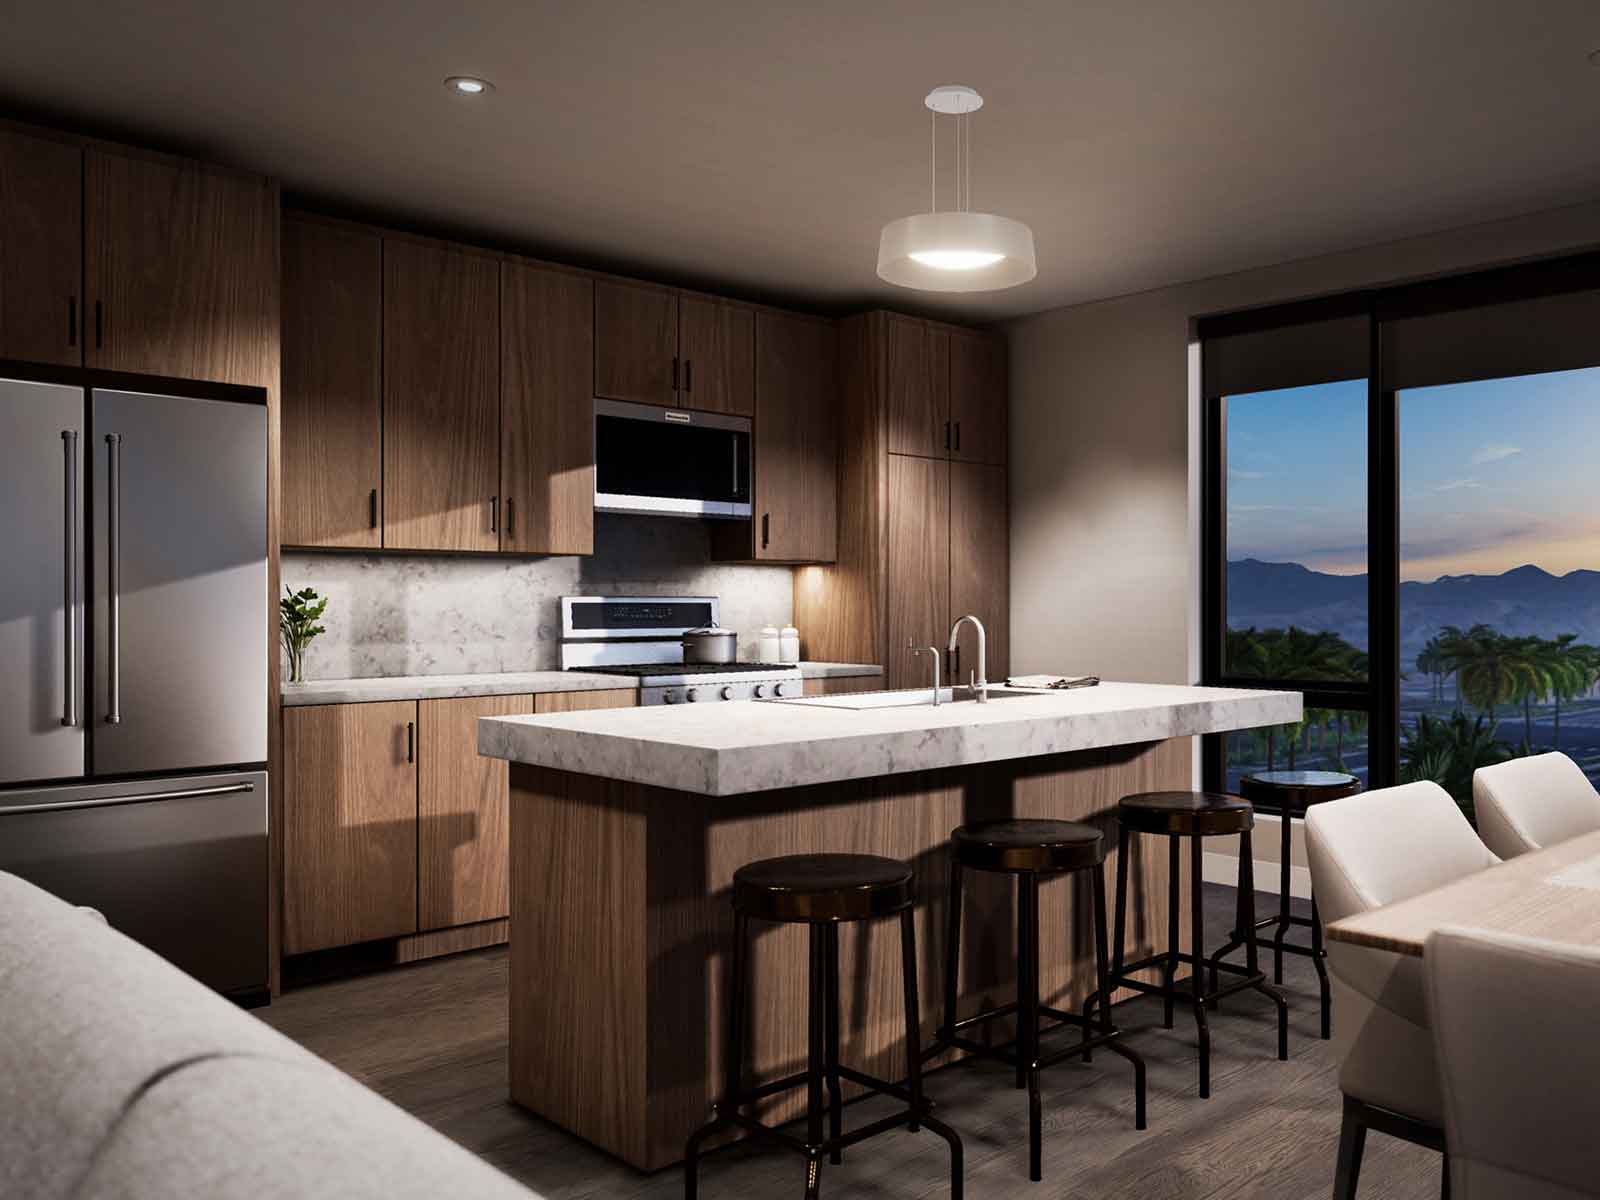 rendering of a modern, open kitchen with a center island